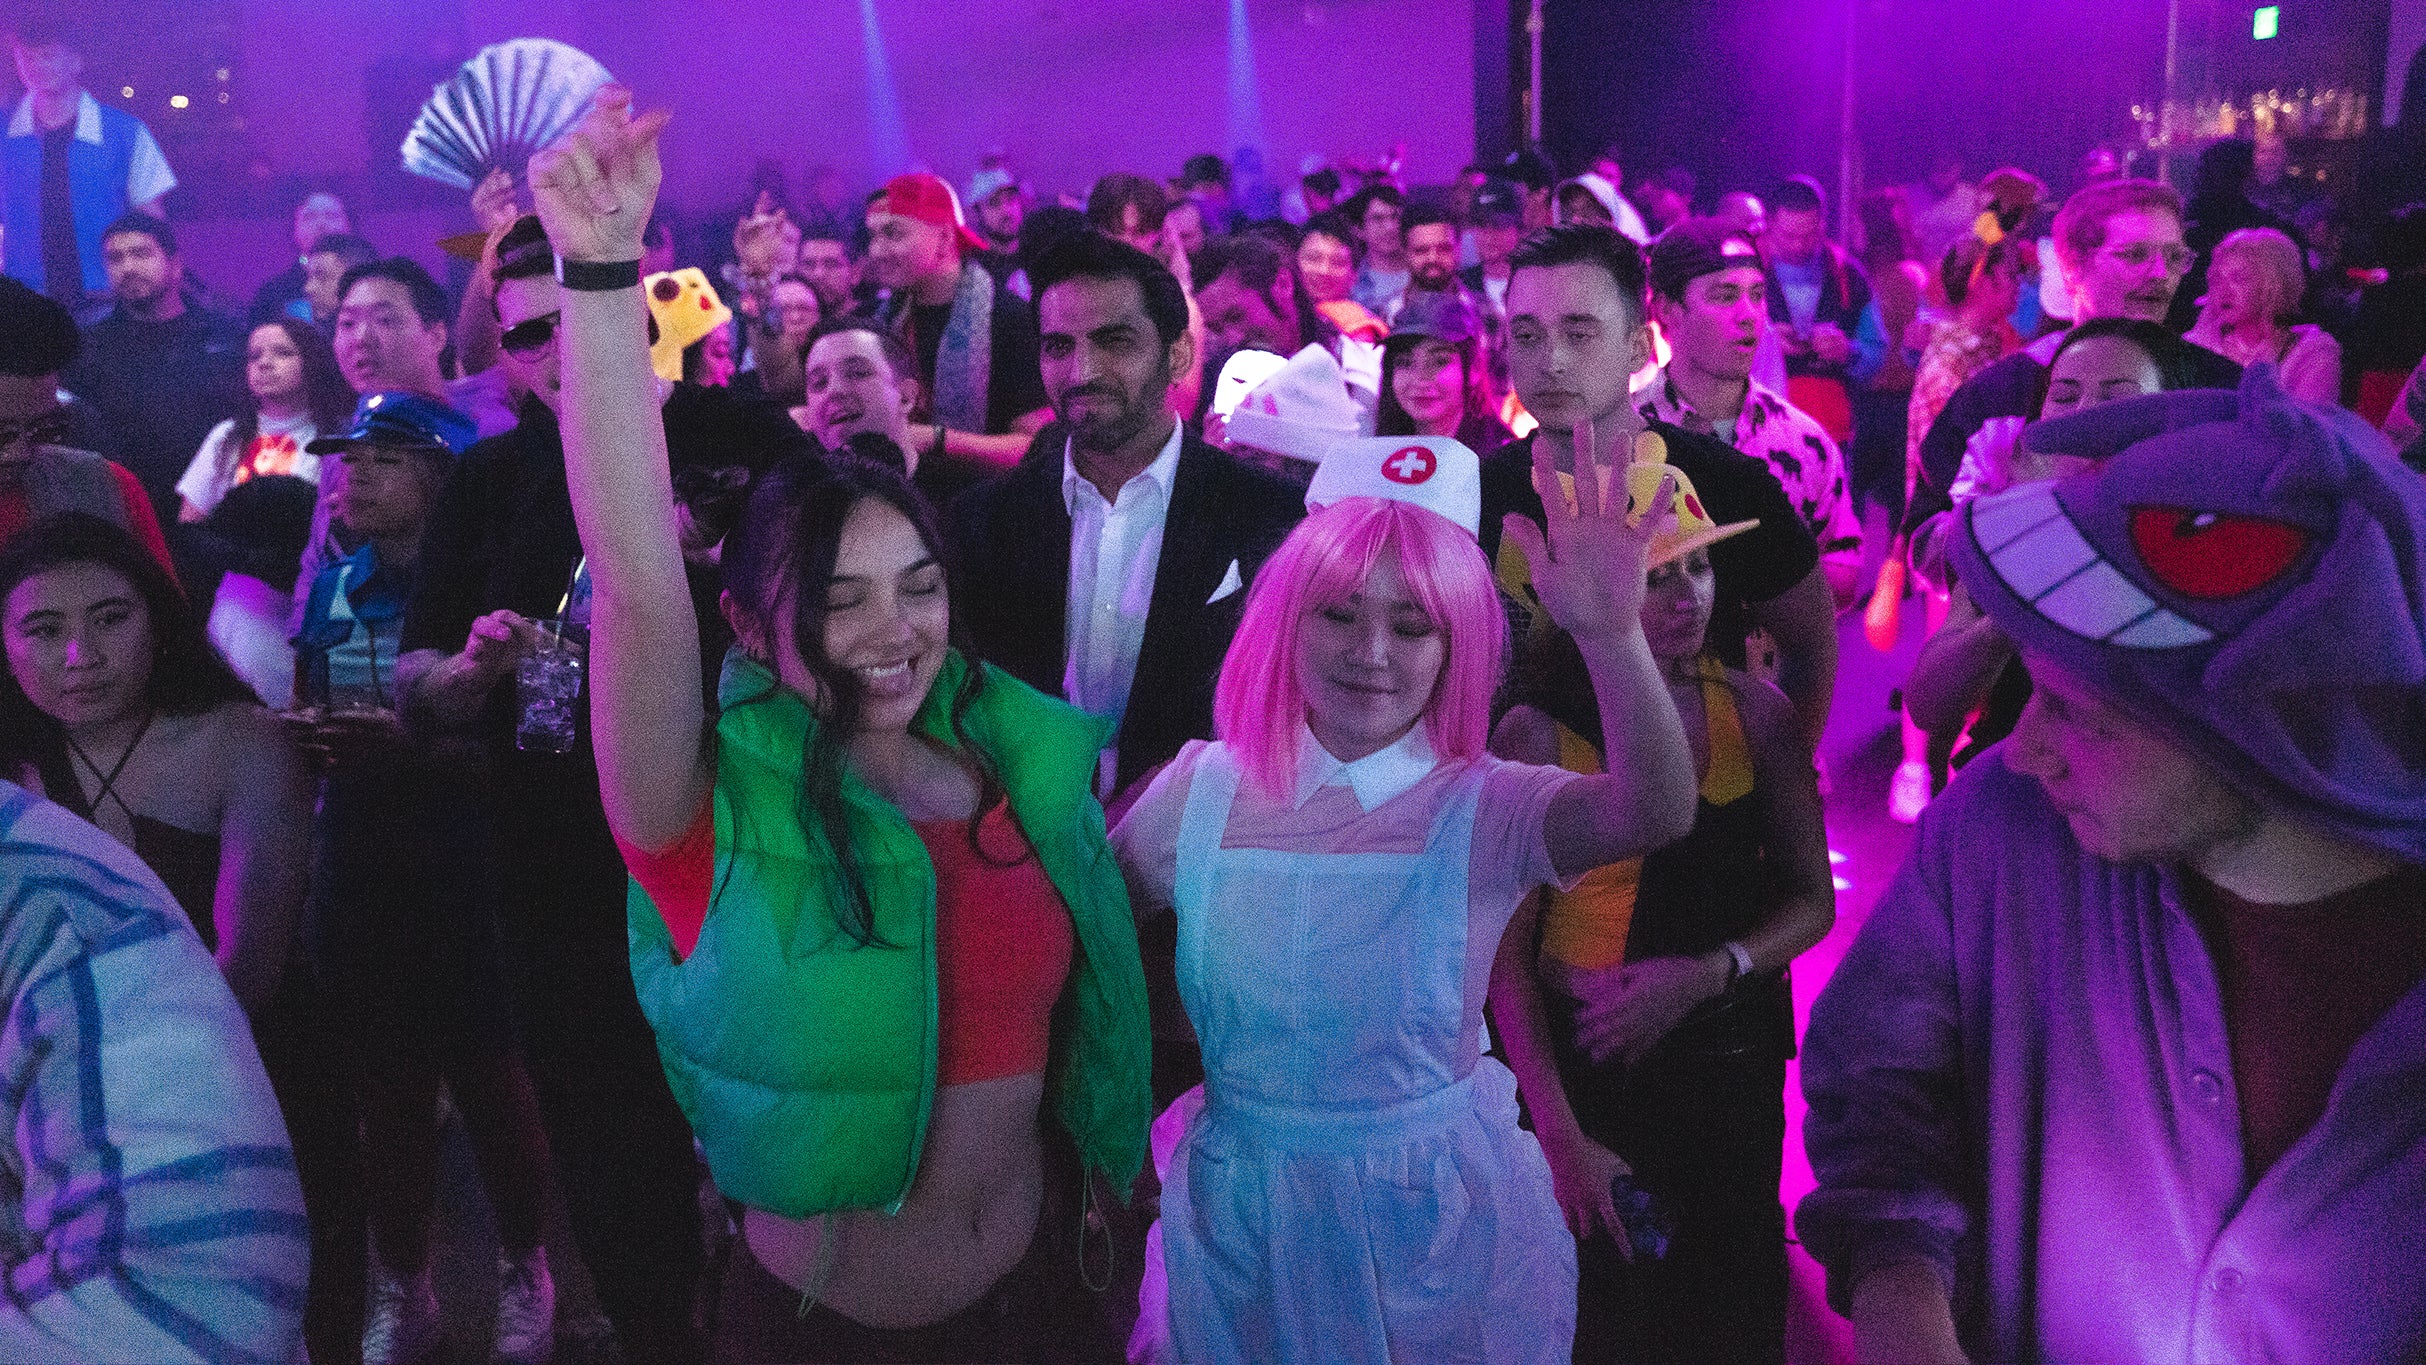 The Kawaii Rave - 18+ Welcome With Valid ID in San Diego promo photo for CITI® Cardmember Preferred presale offer code